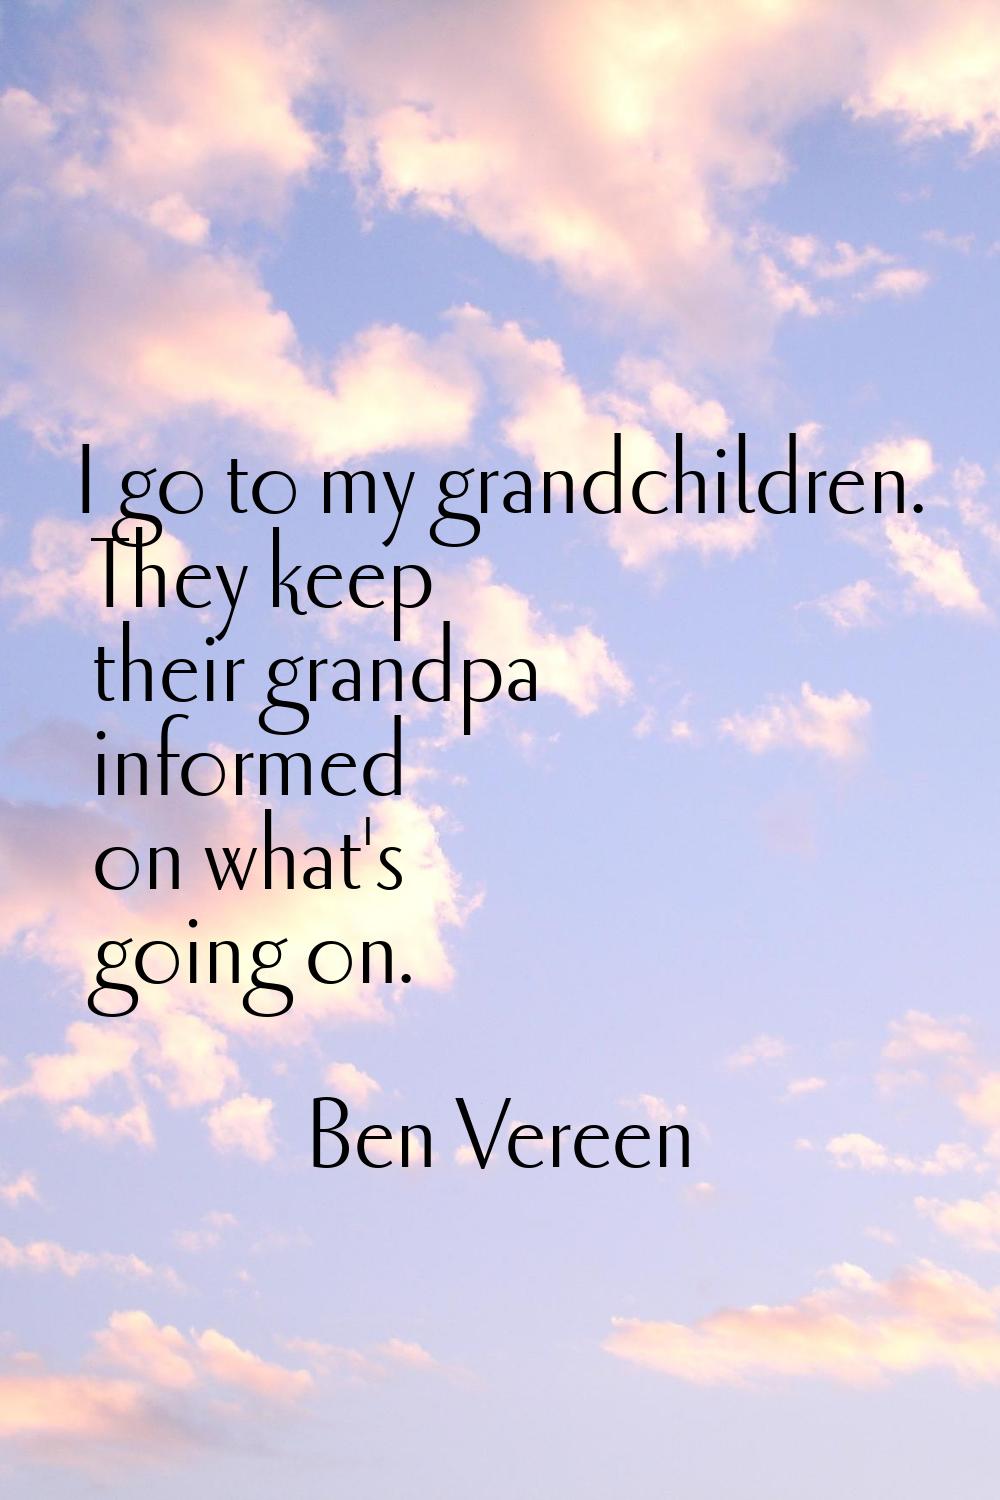 I go to my grandchildren. They keep their grandpa informed on what's going on.